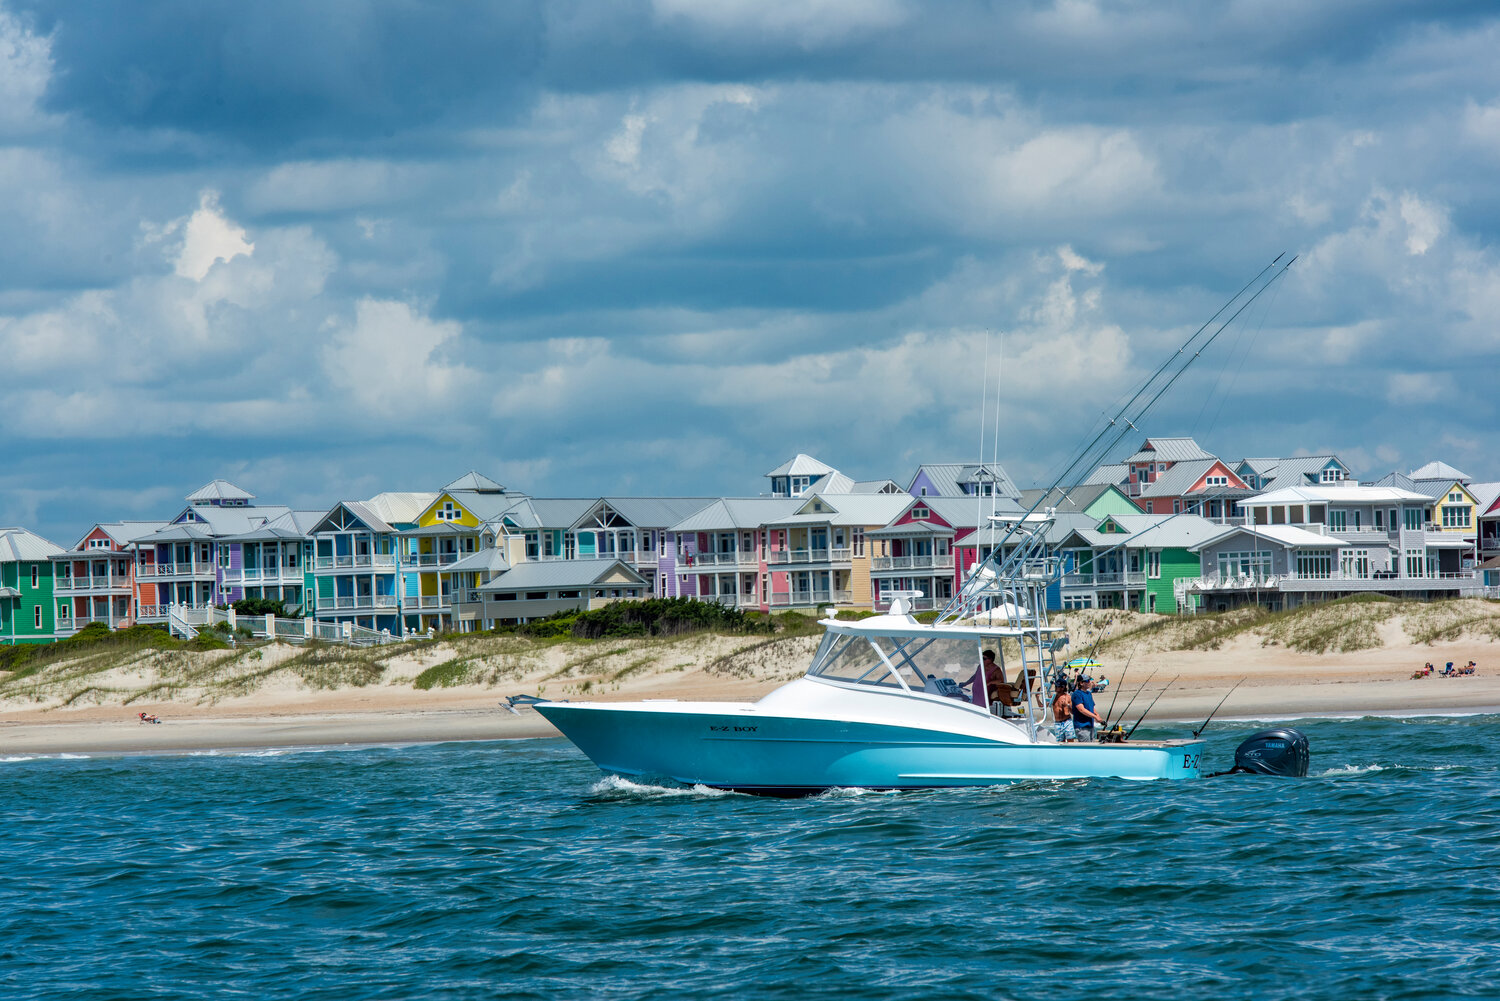 Known as the Fisherman's Paradise, Morehead City offers some of the best fishing spots on the East Coast.